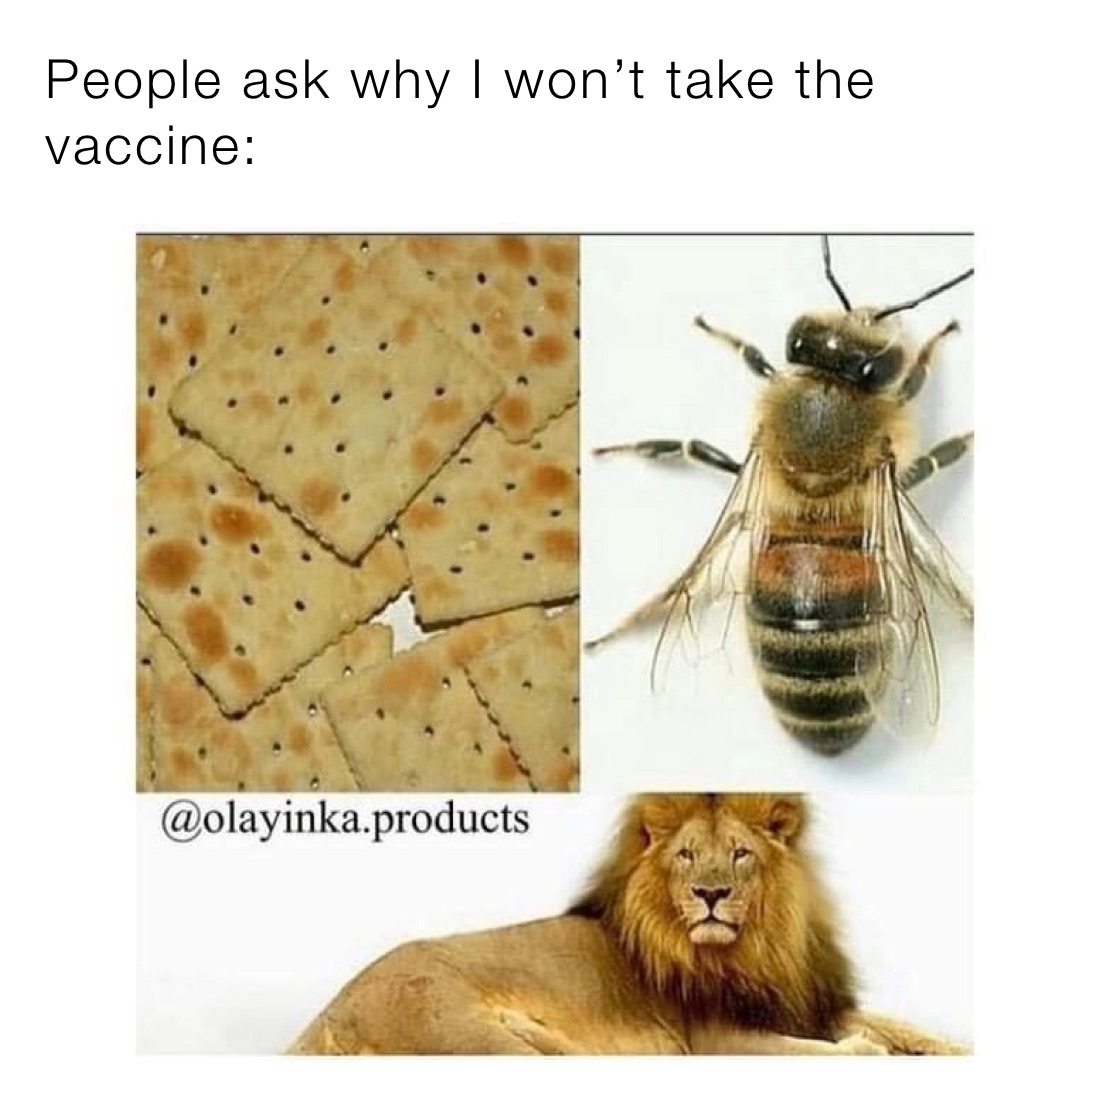 People ask why I won’t take the vaccine: